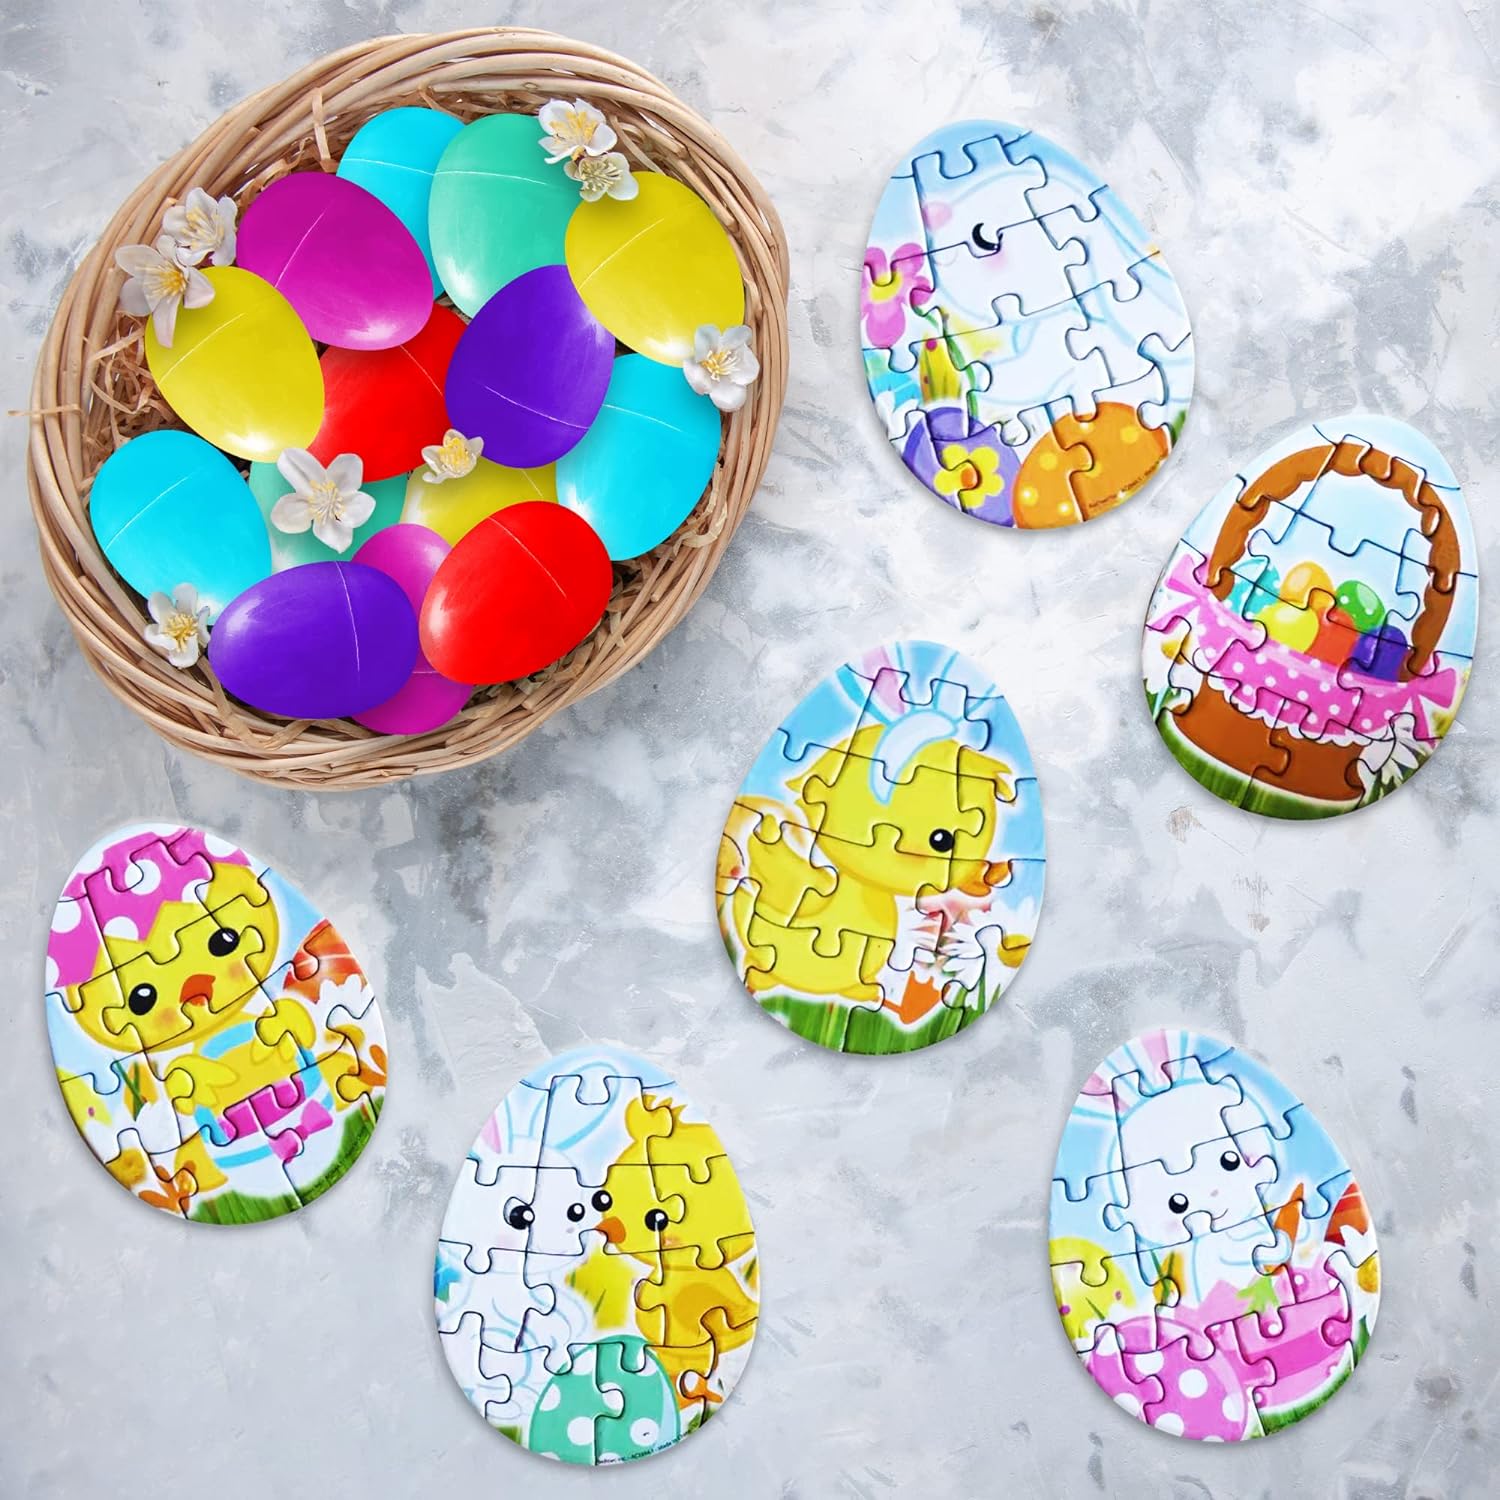 ArtCreativity Pre-Filled Easter Eggs with Puzzles Inside (Set of 24) Colorful Surprise Eggs for Kids with Jigsaw Puzzles - Easter Gift for Toddlers - Easter Basket Fillers and Goodie Bag Stuffers